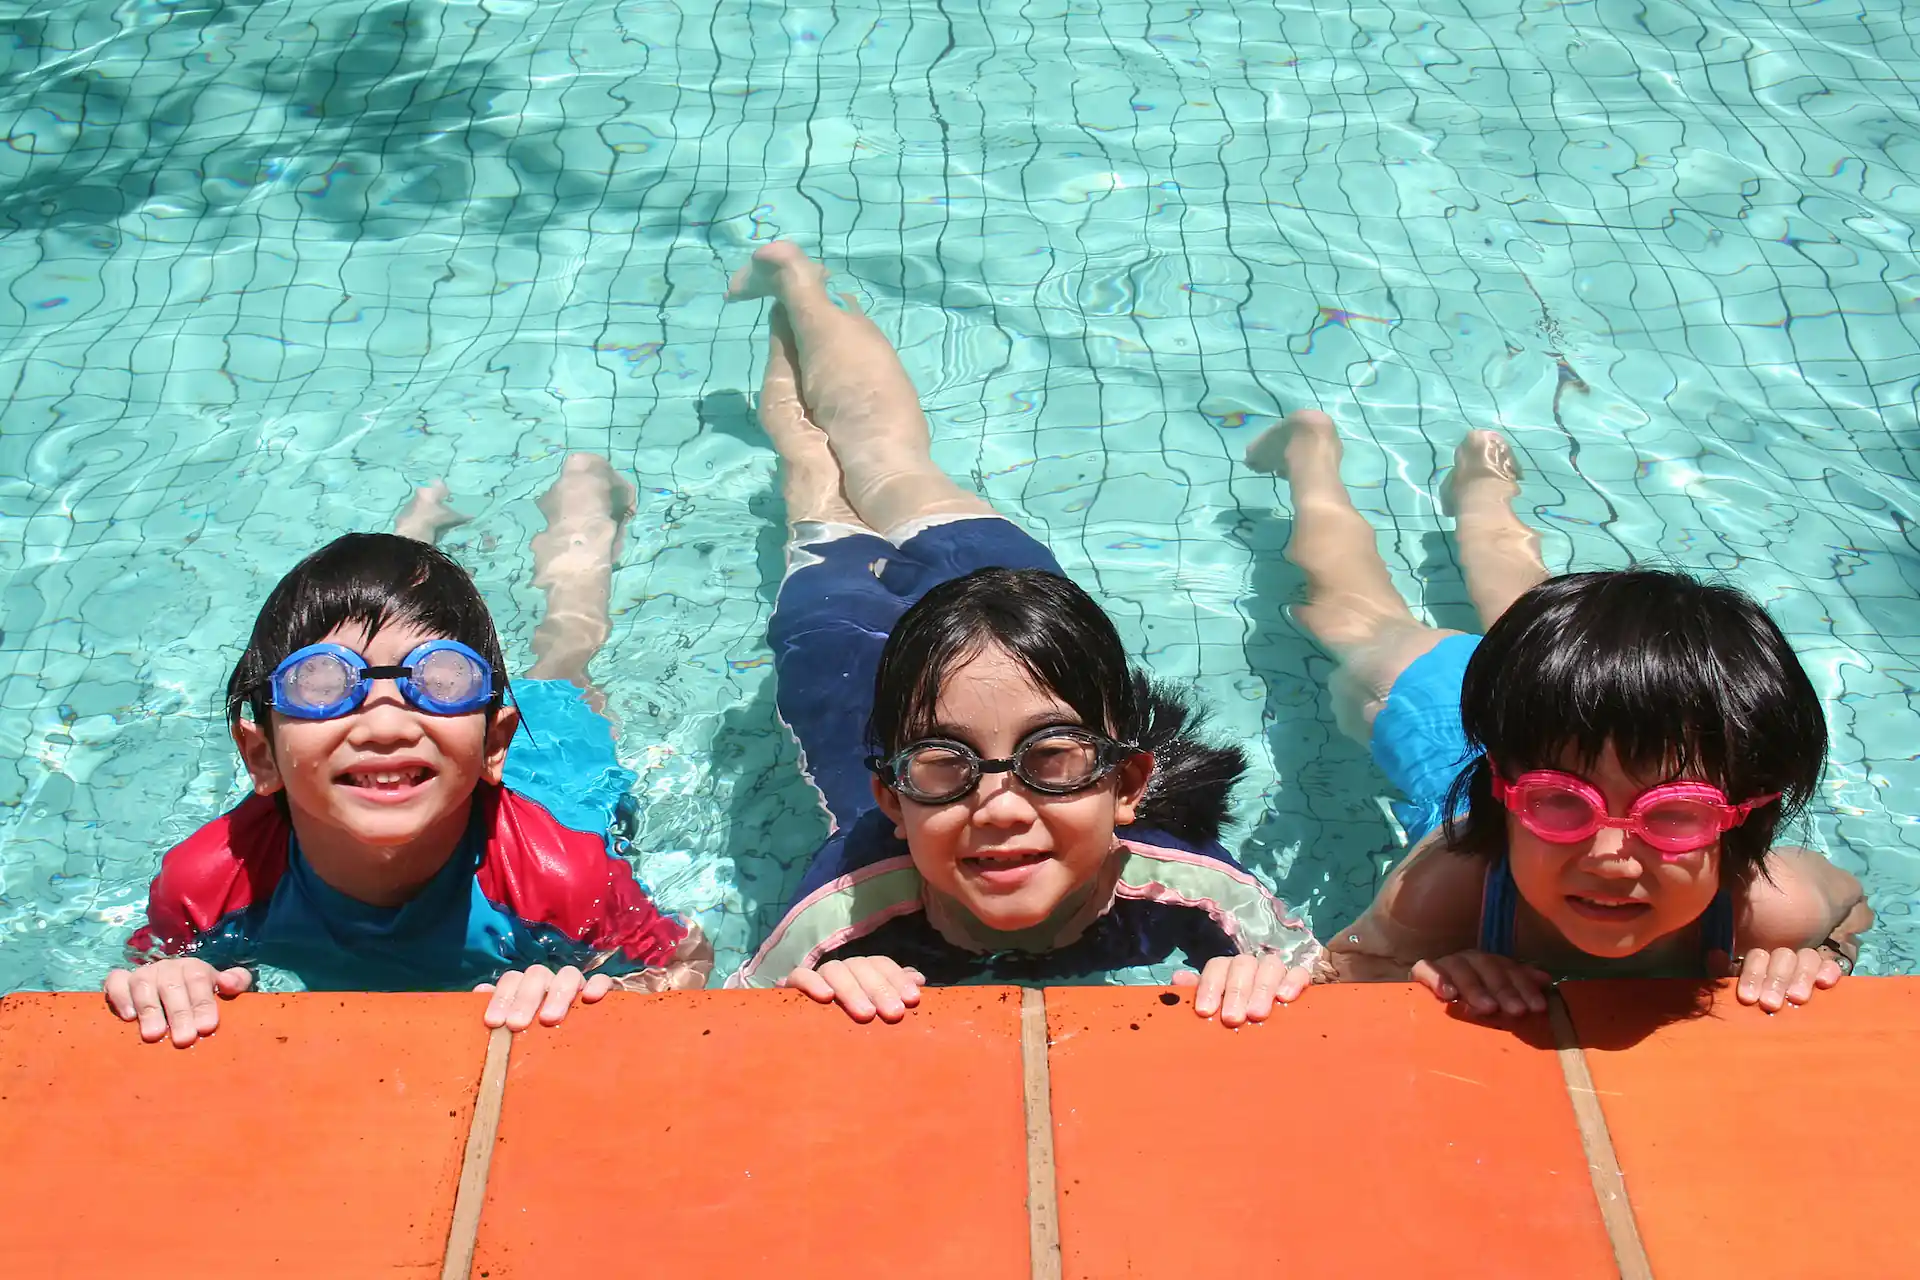 Three children in swimsuits and goggles smile while gripping the wall of a pool's shallow end. This vantage point helps demonstrate how to supervise your kids when they swim.